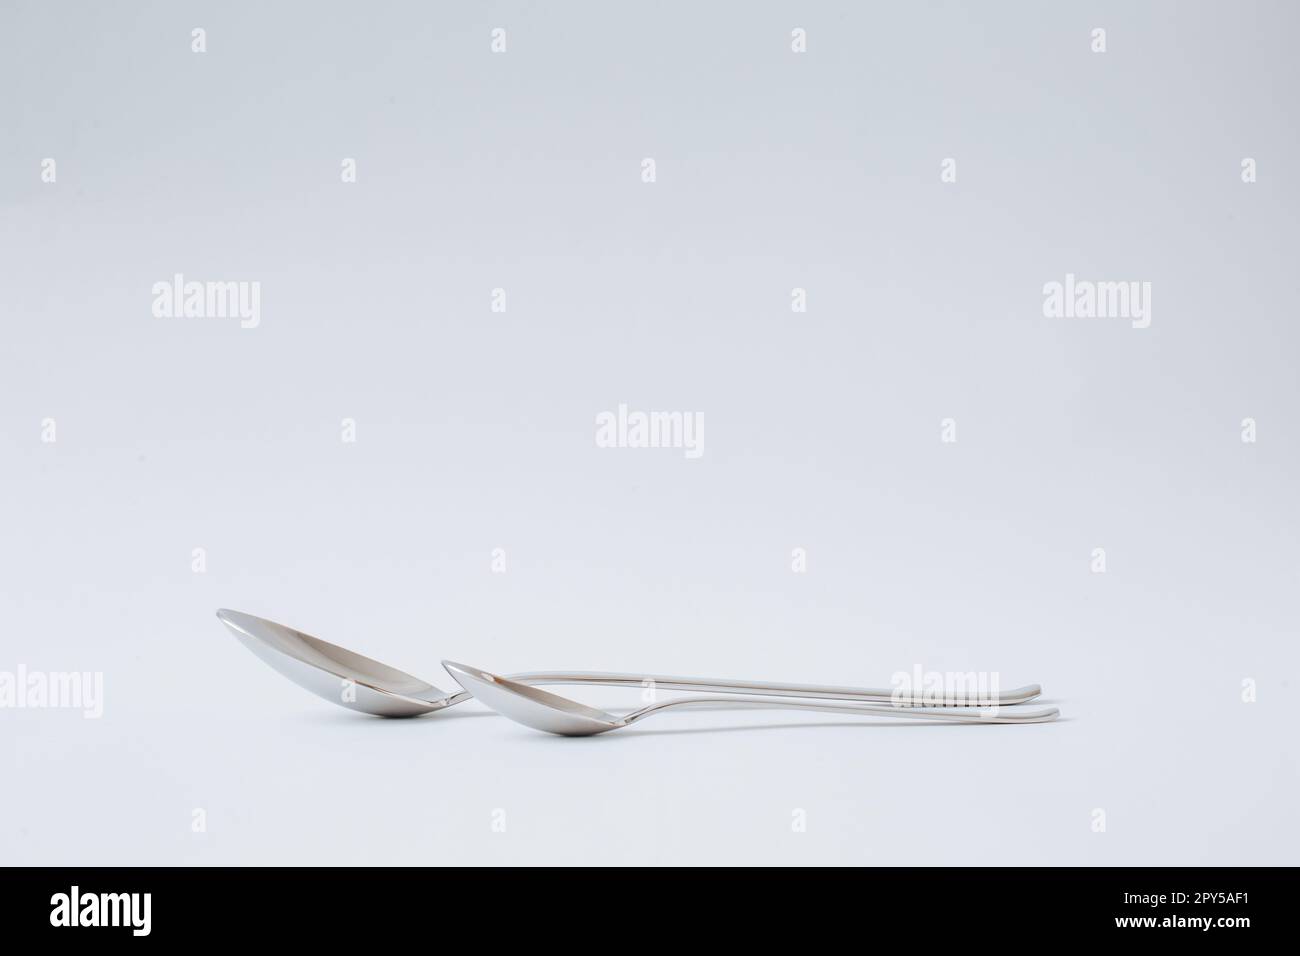 Stainless steel spoon, teaspoon laying on white background, kitchenware, copy space, close-up. Stock Photo